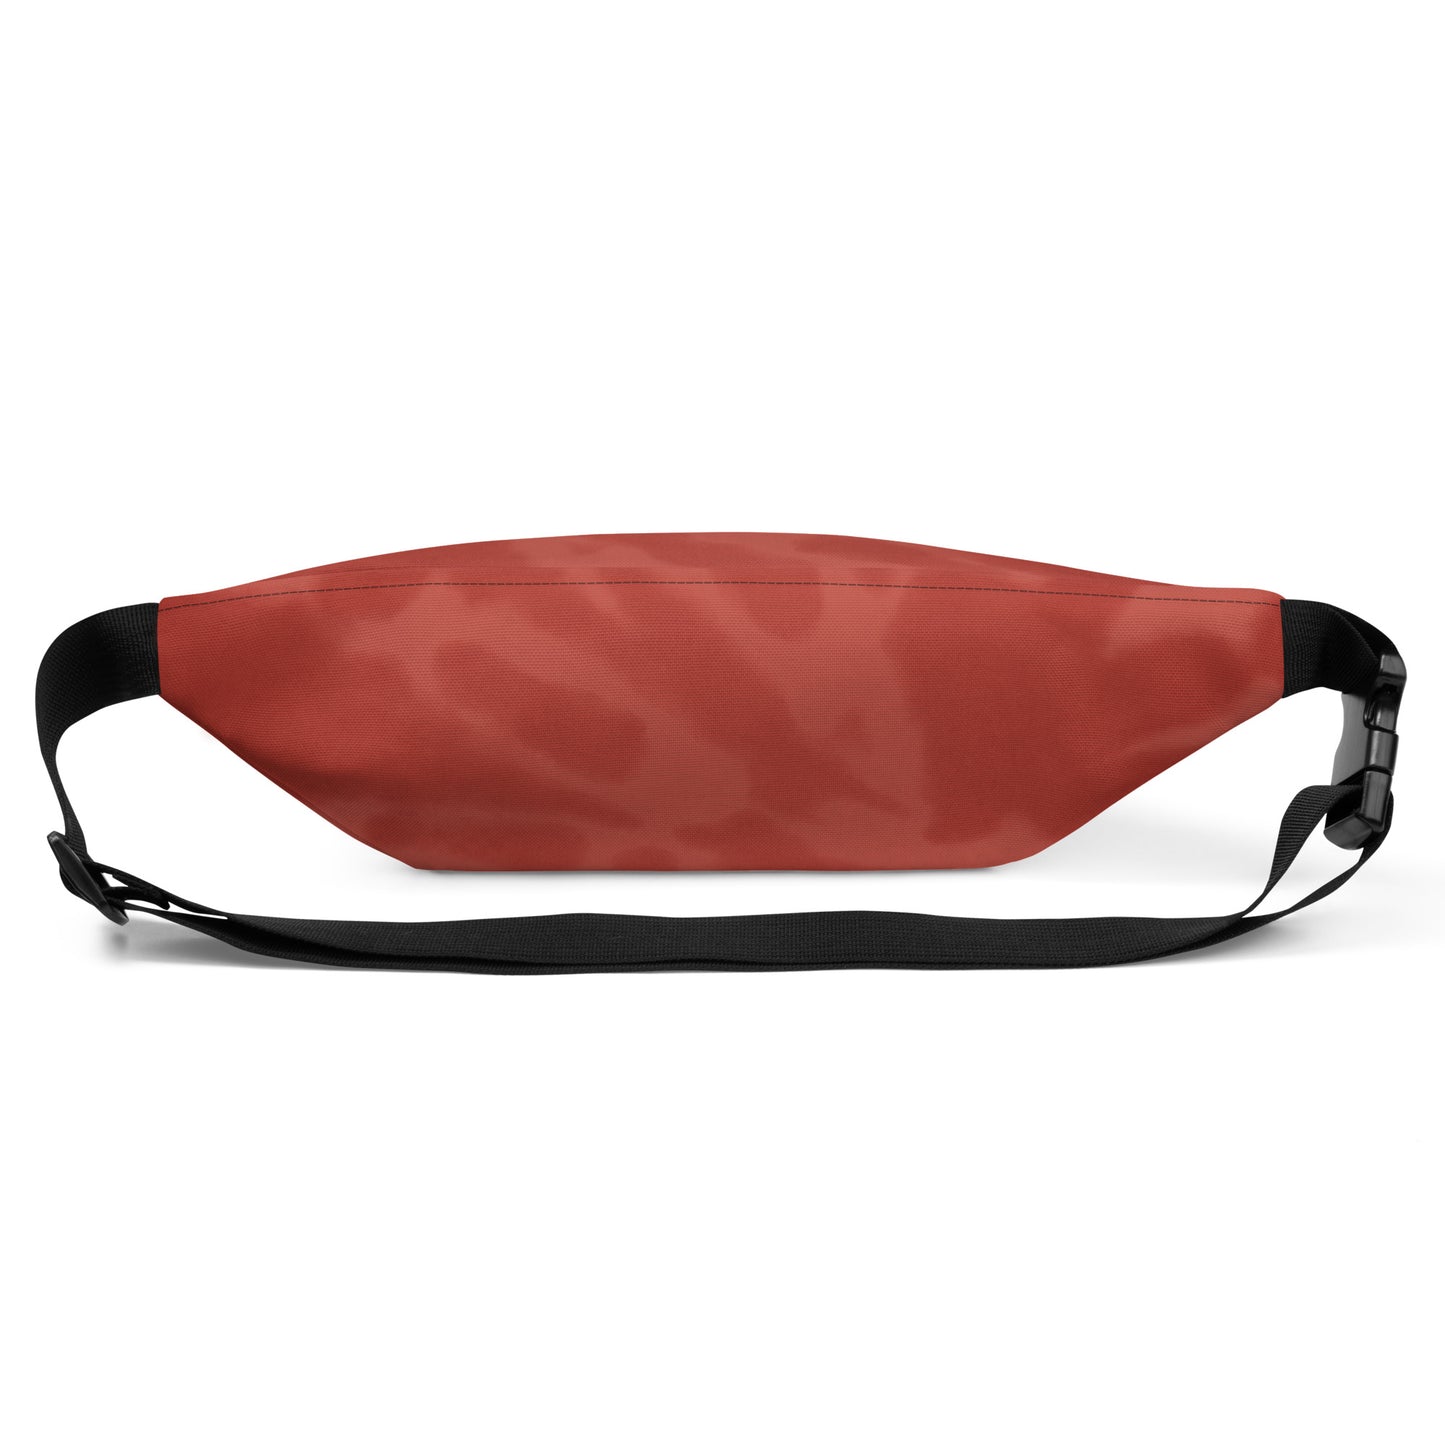 Travel Gift Fanny Pack - Red Tie-Dye • YQT Thunder Bay • YHM Designs - Image 09